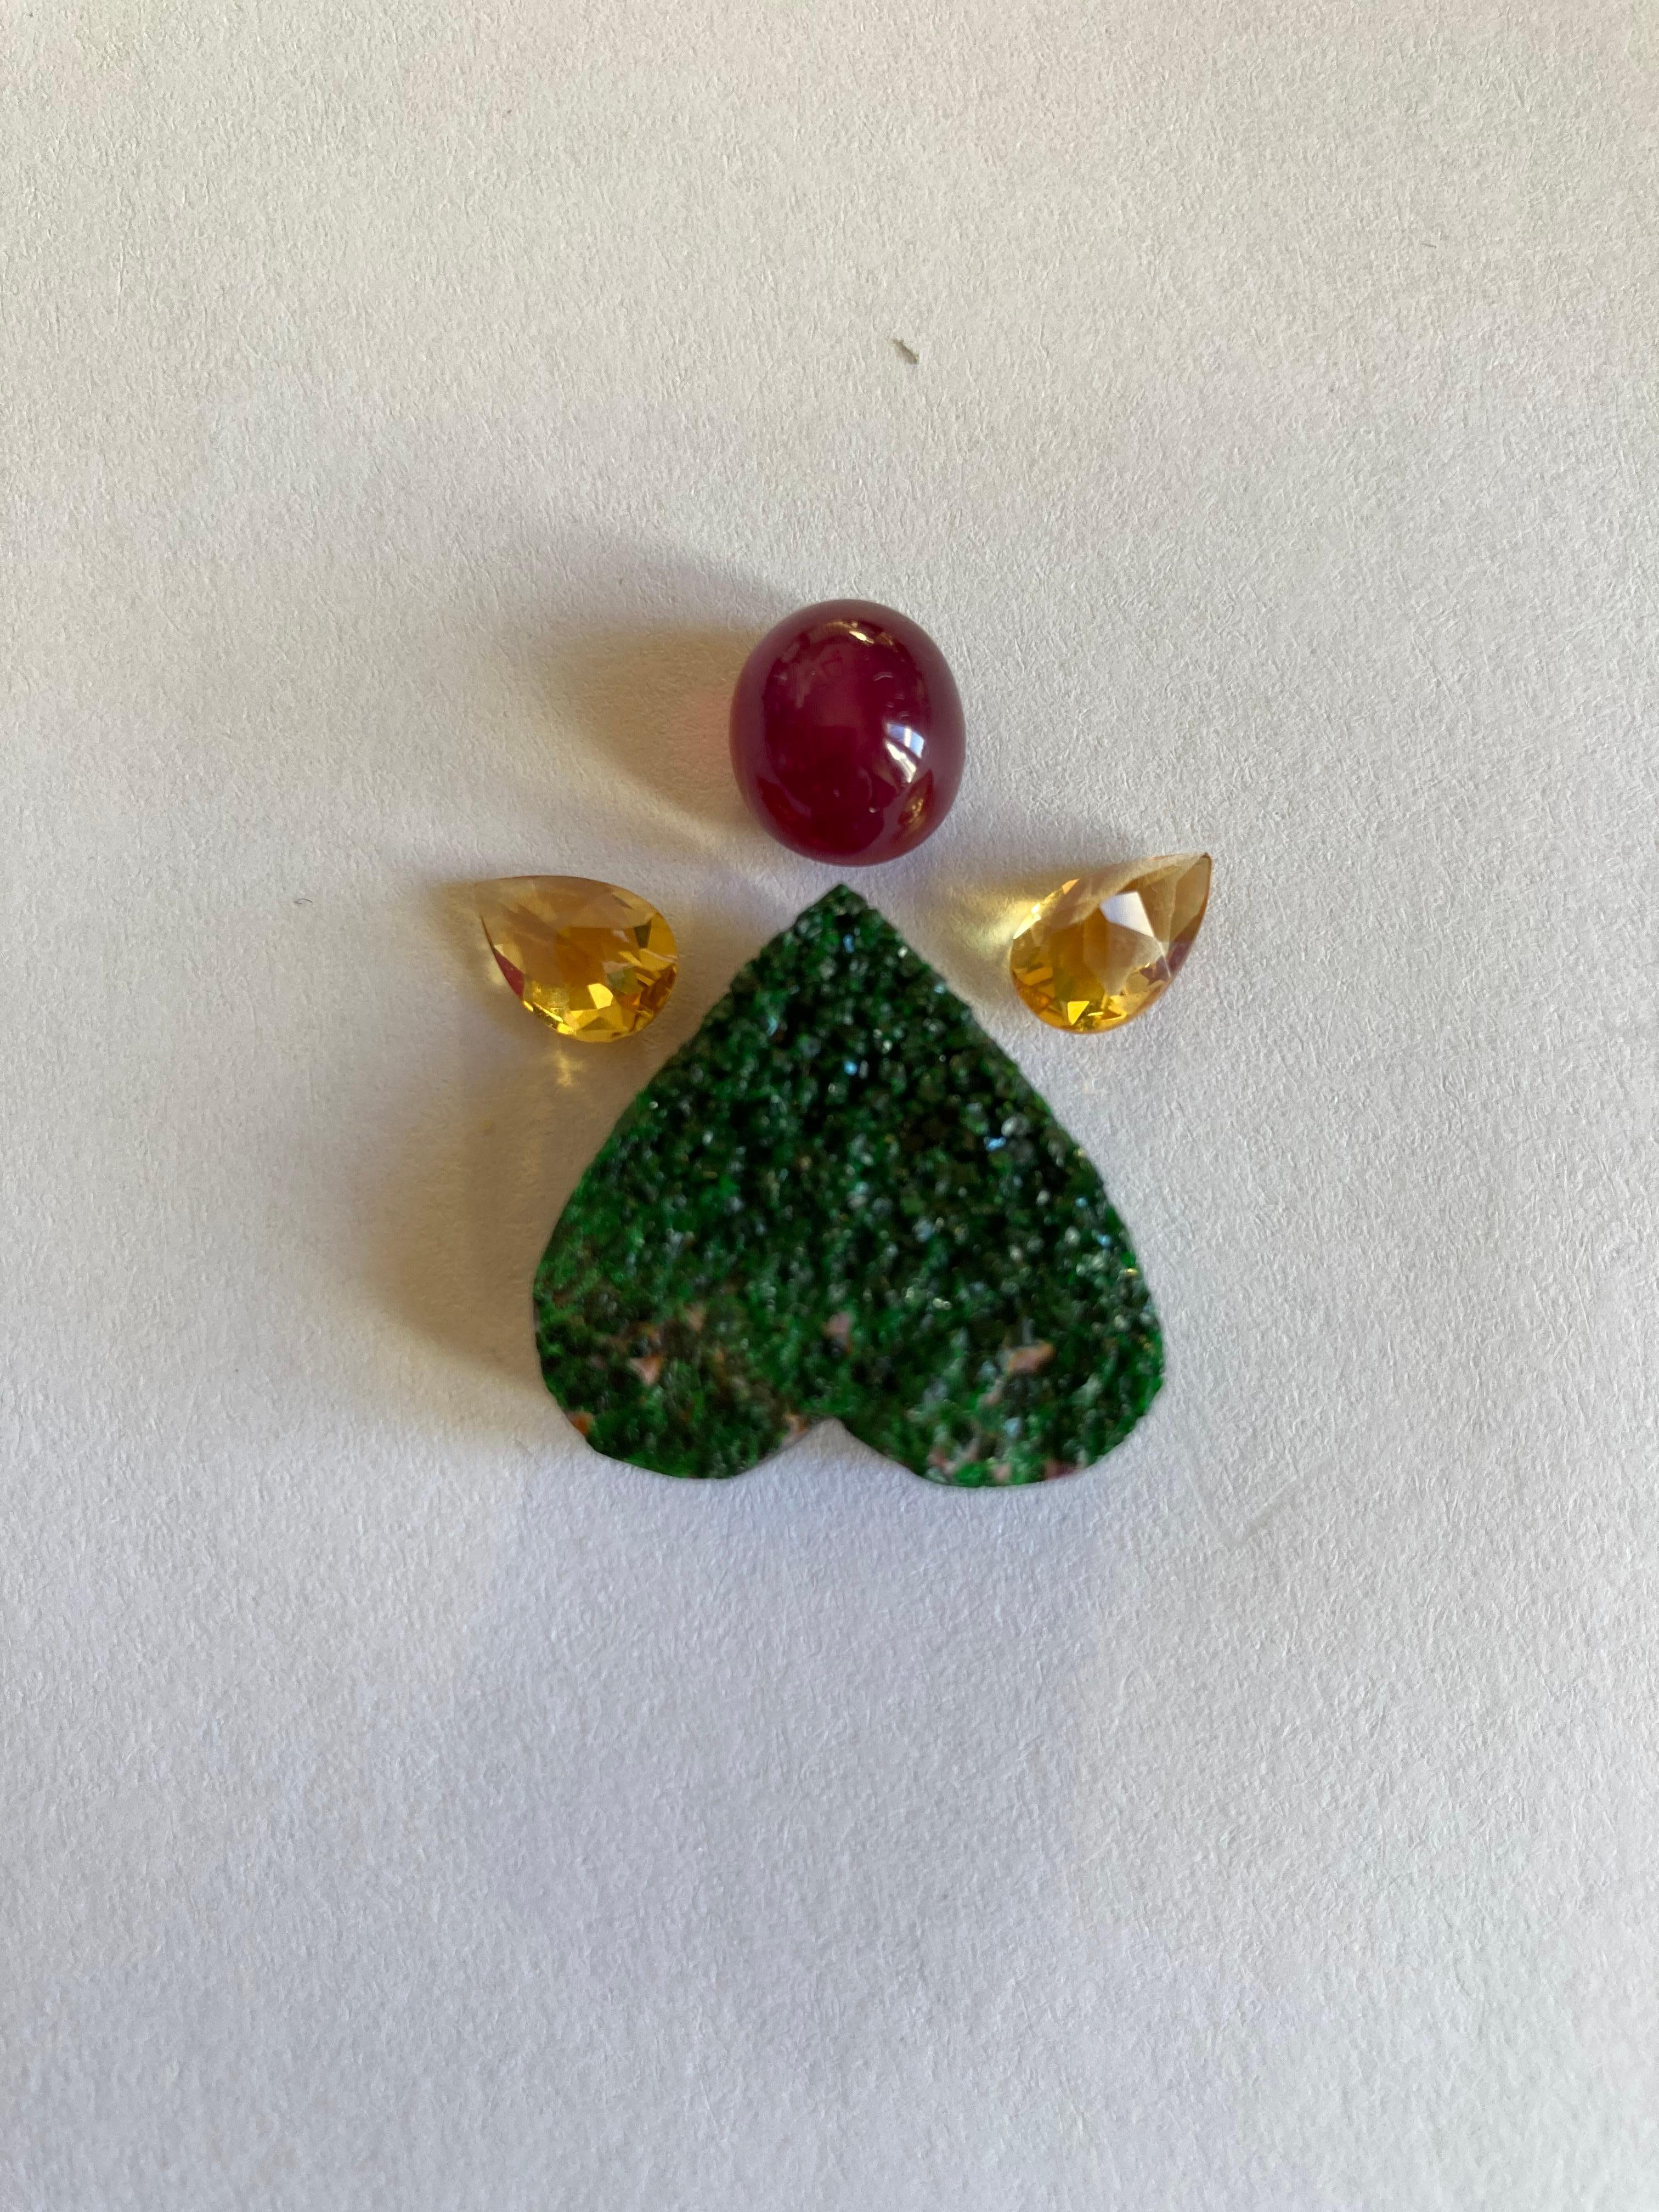 Green Granat Heart Necklace with Star Ruby Cabochon and Citrine Original Design For Sale 1